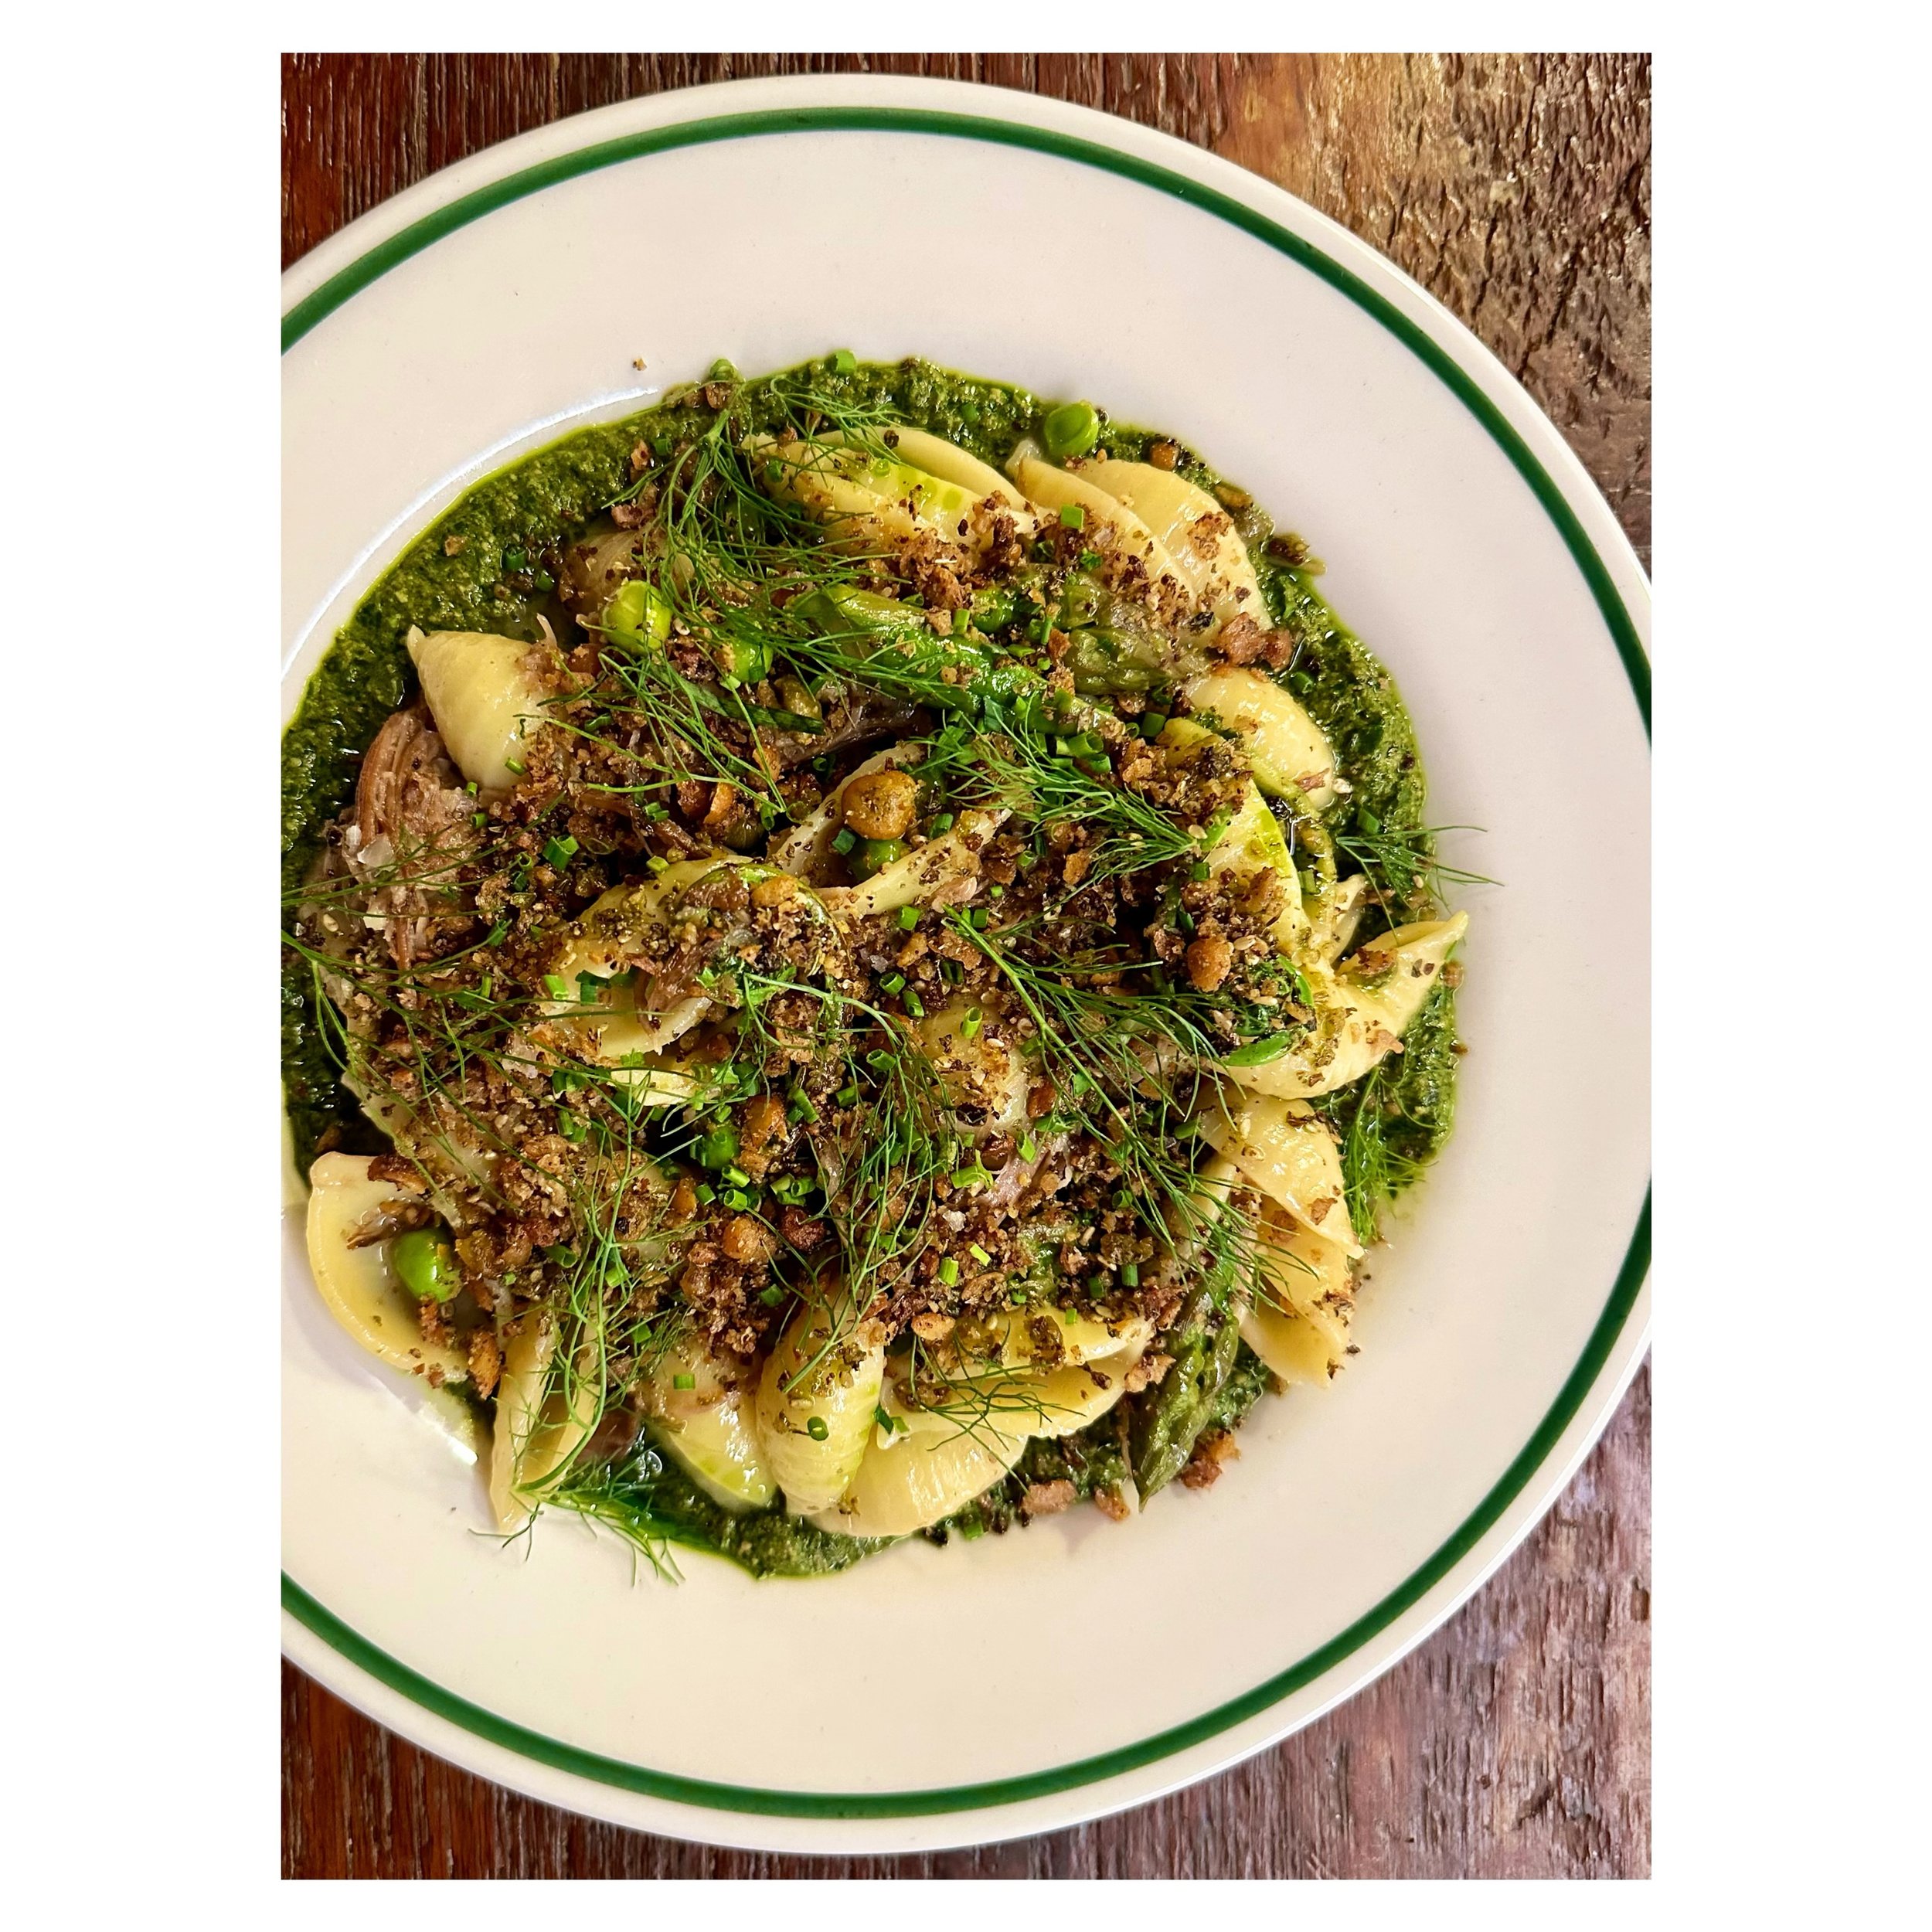 Tonight&rsquo;s Wednesday Wine + Pasta special: lamb and lemon pesto pasta with spring greens, peas, fresh herbs and crispy bits! Snag yourself a bowl with a glass of wine from a curated list for $30. Only tonight&mdash;the pasta changes weekly and m